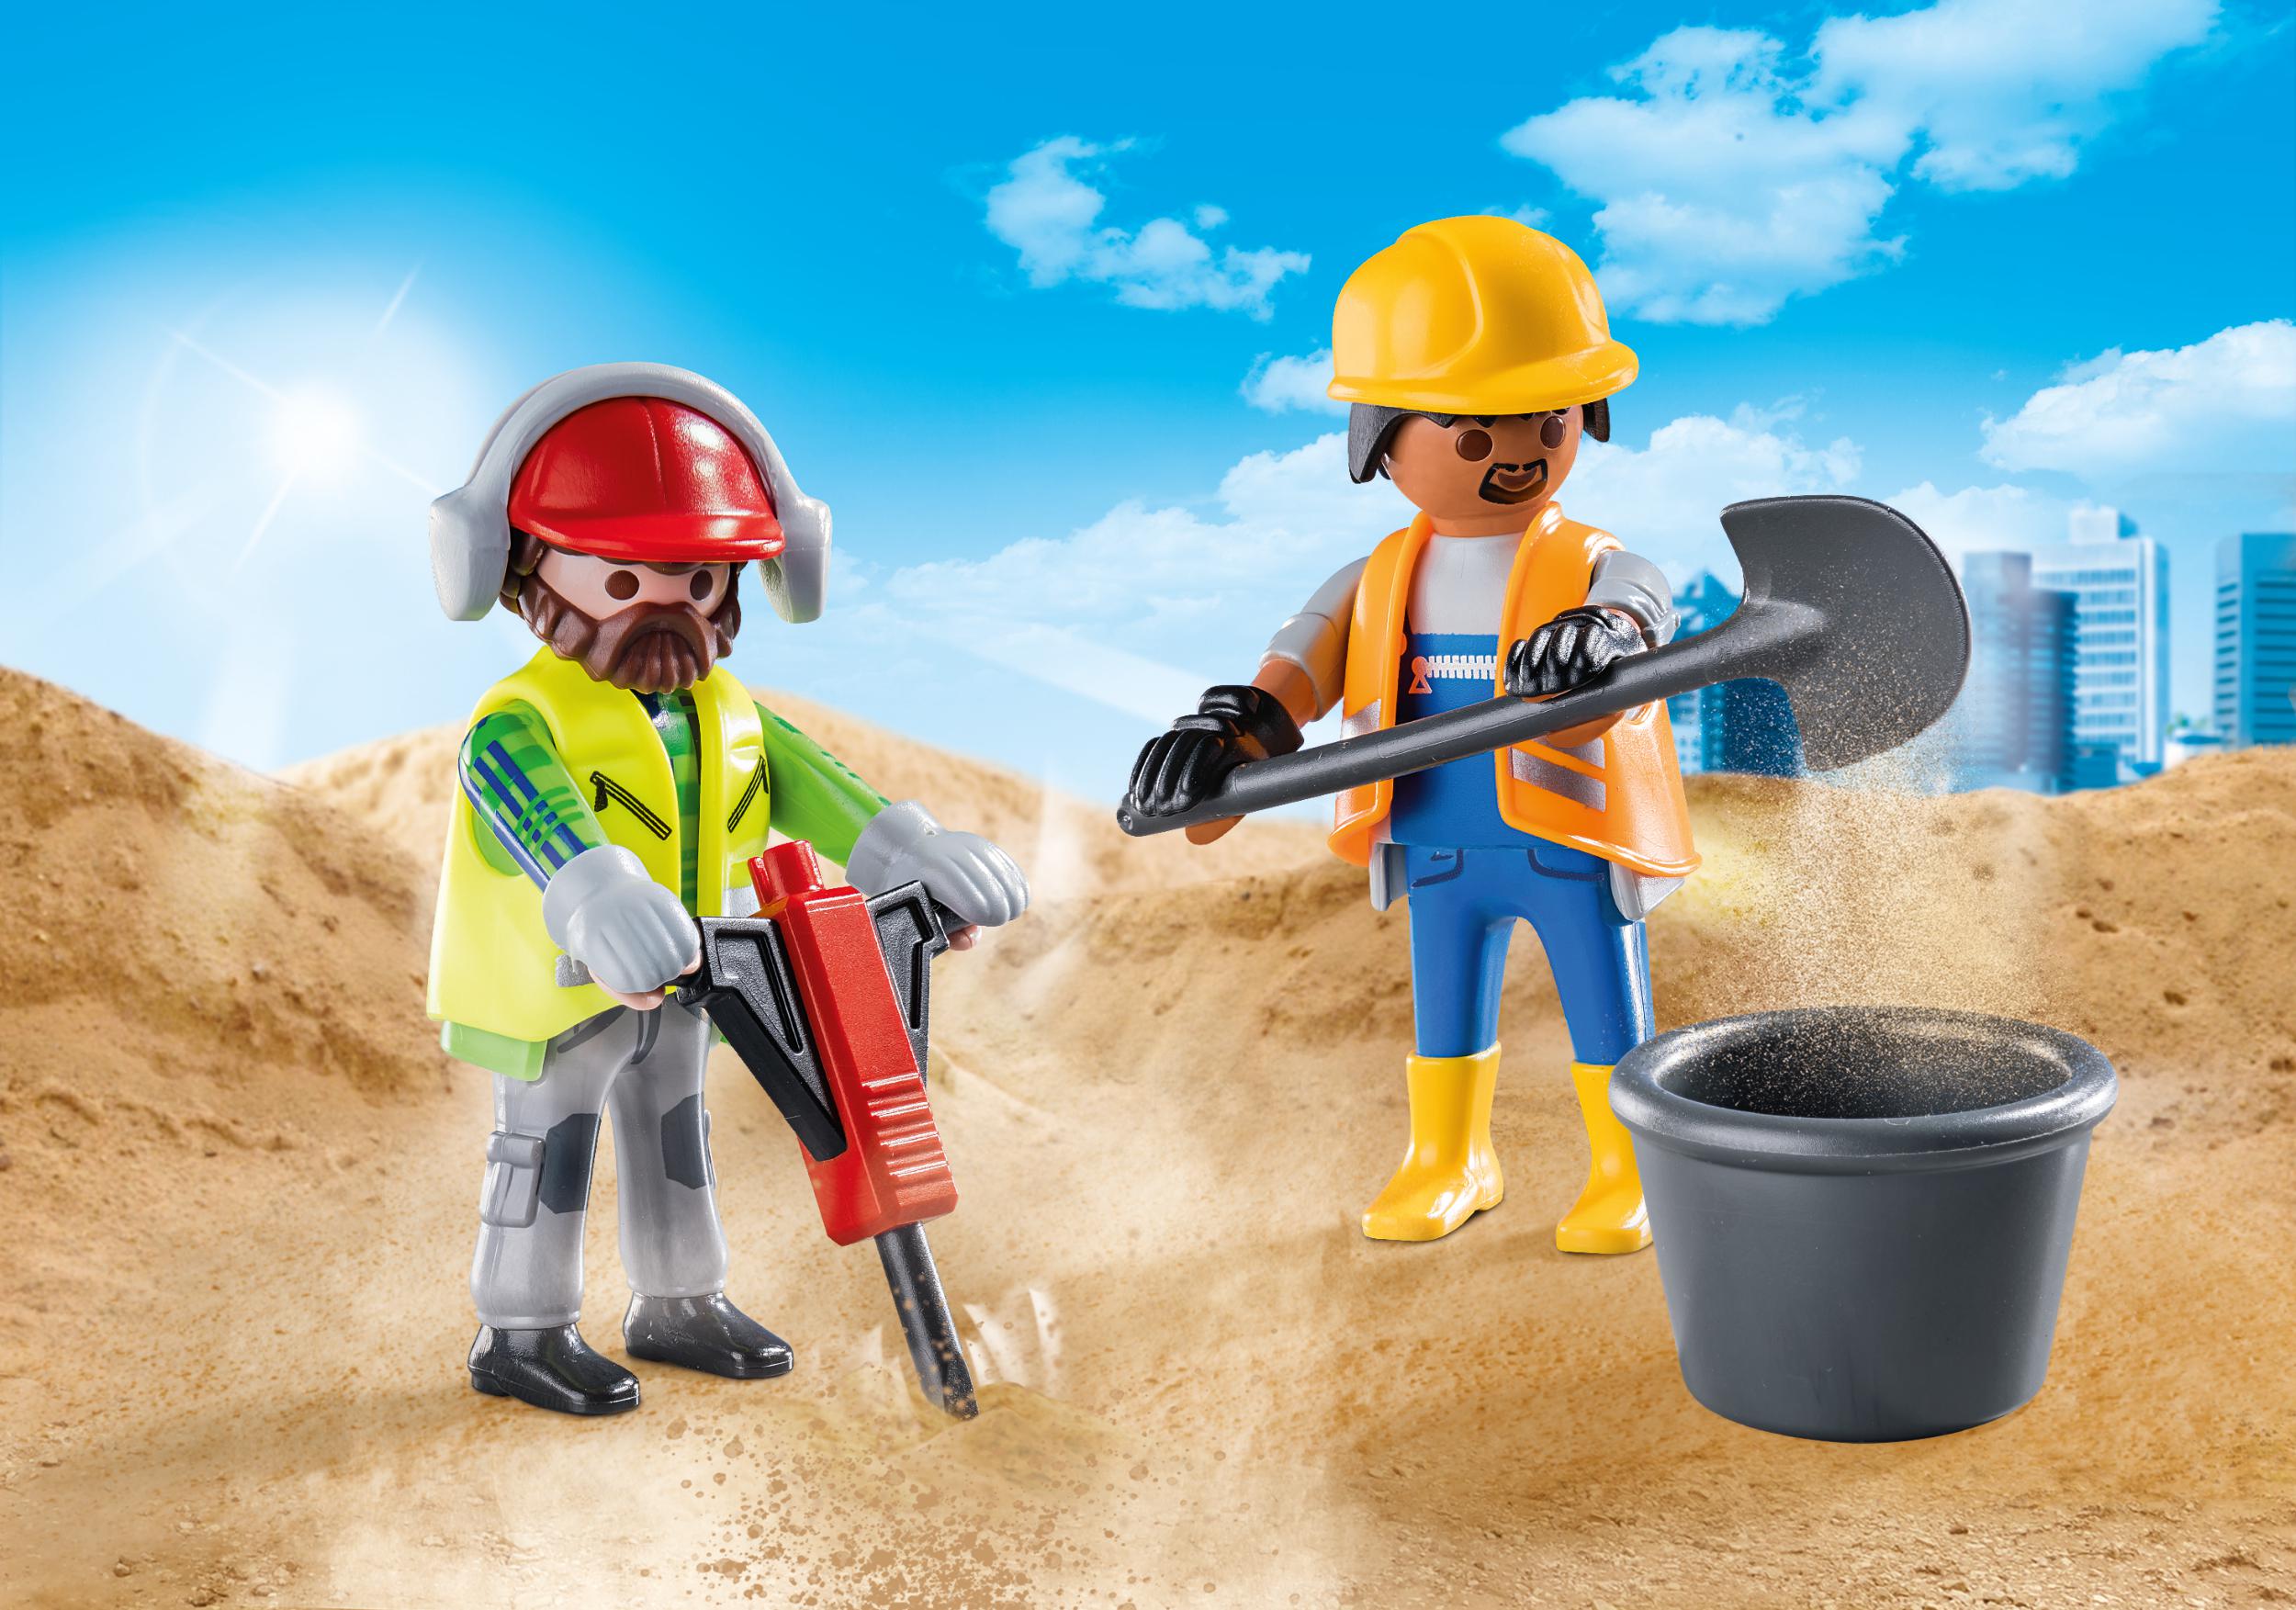 Playmobil City Action Duo Pack Εργάτες οικοδομών 70272 - Playmobil, Playmobil City Action